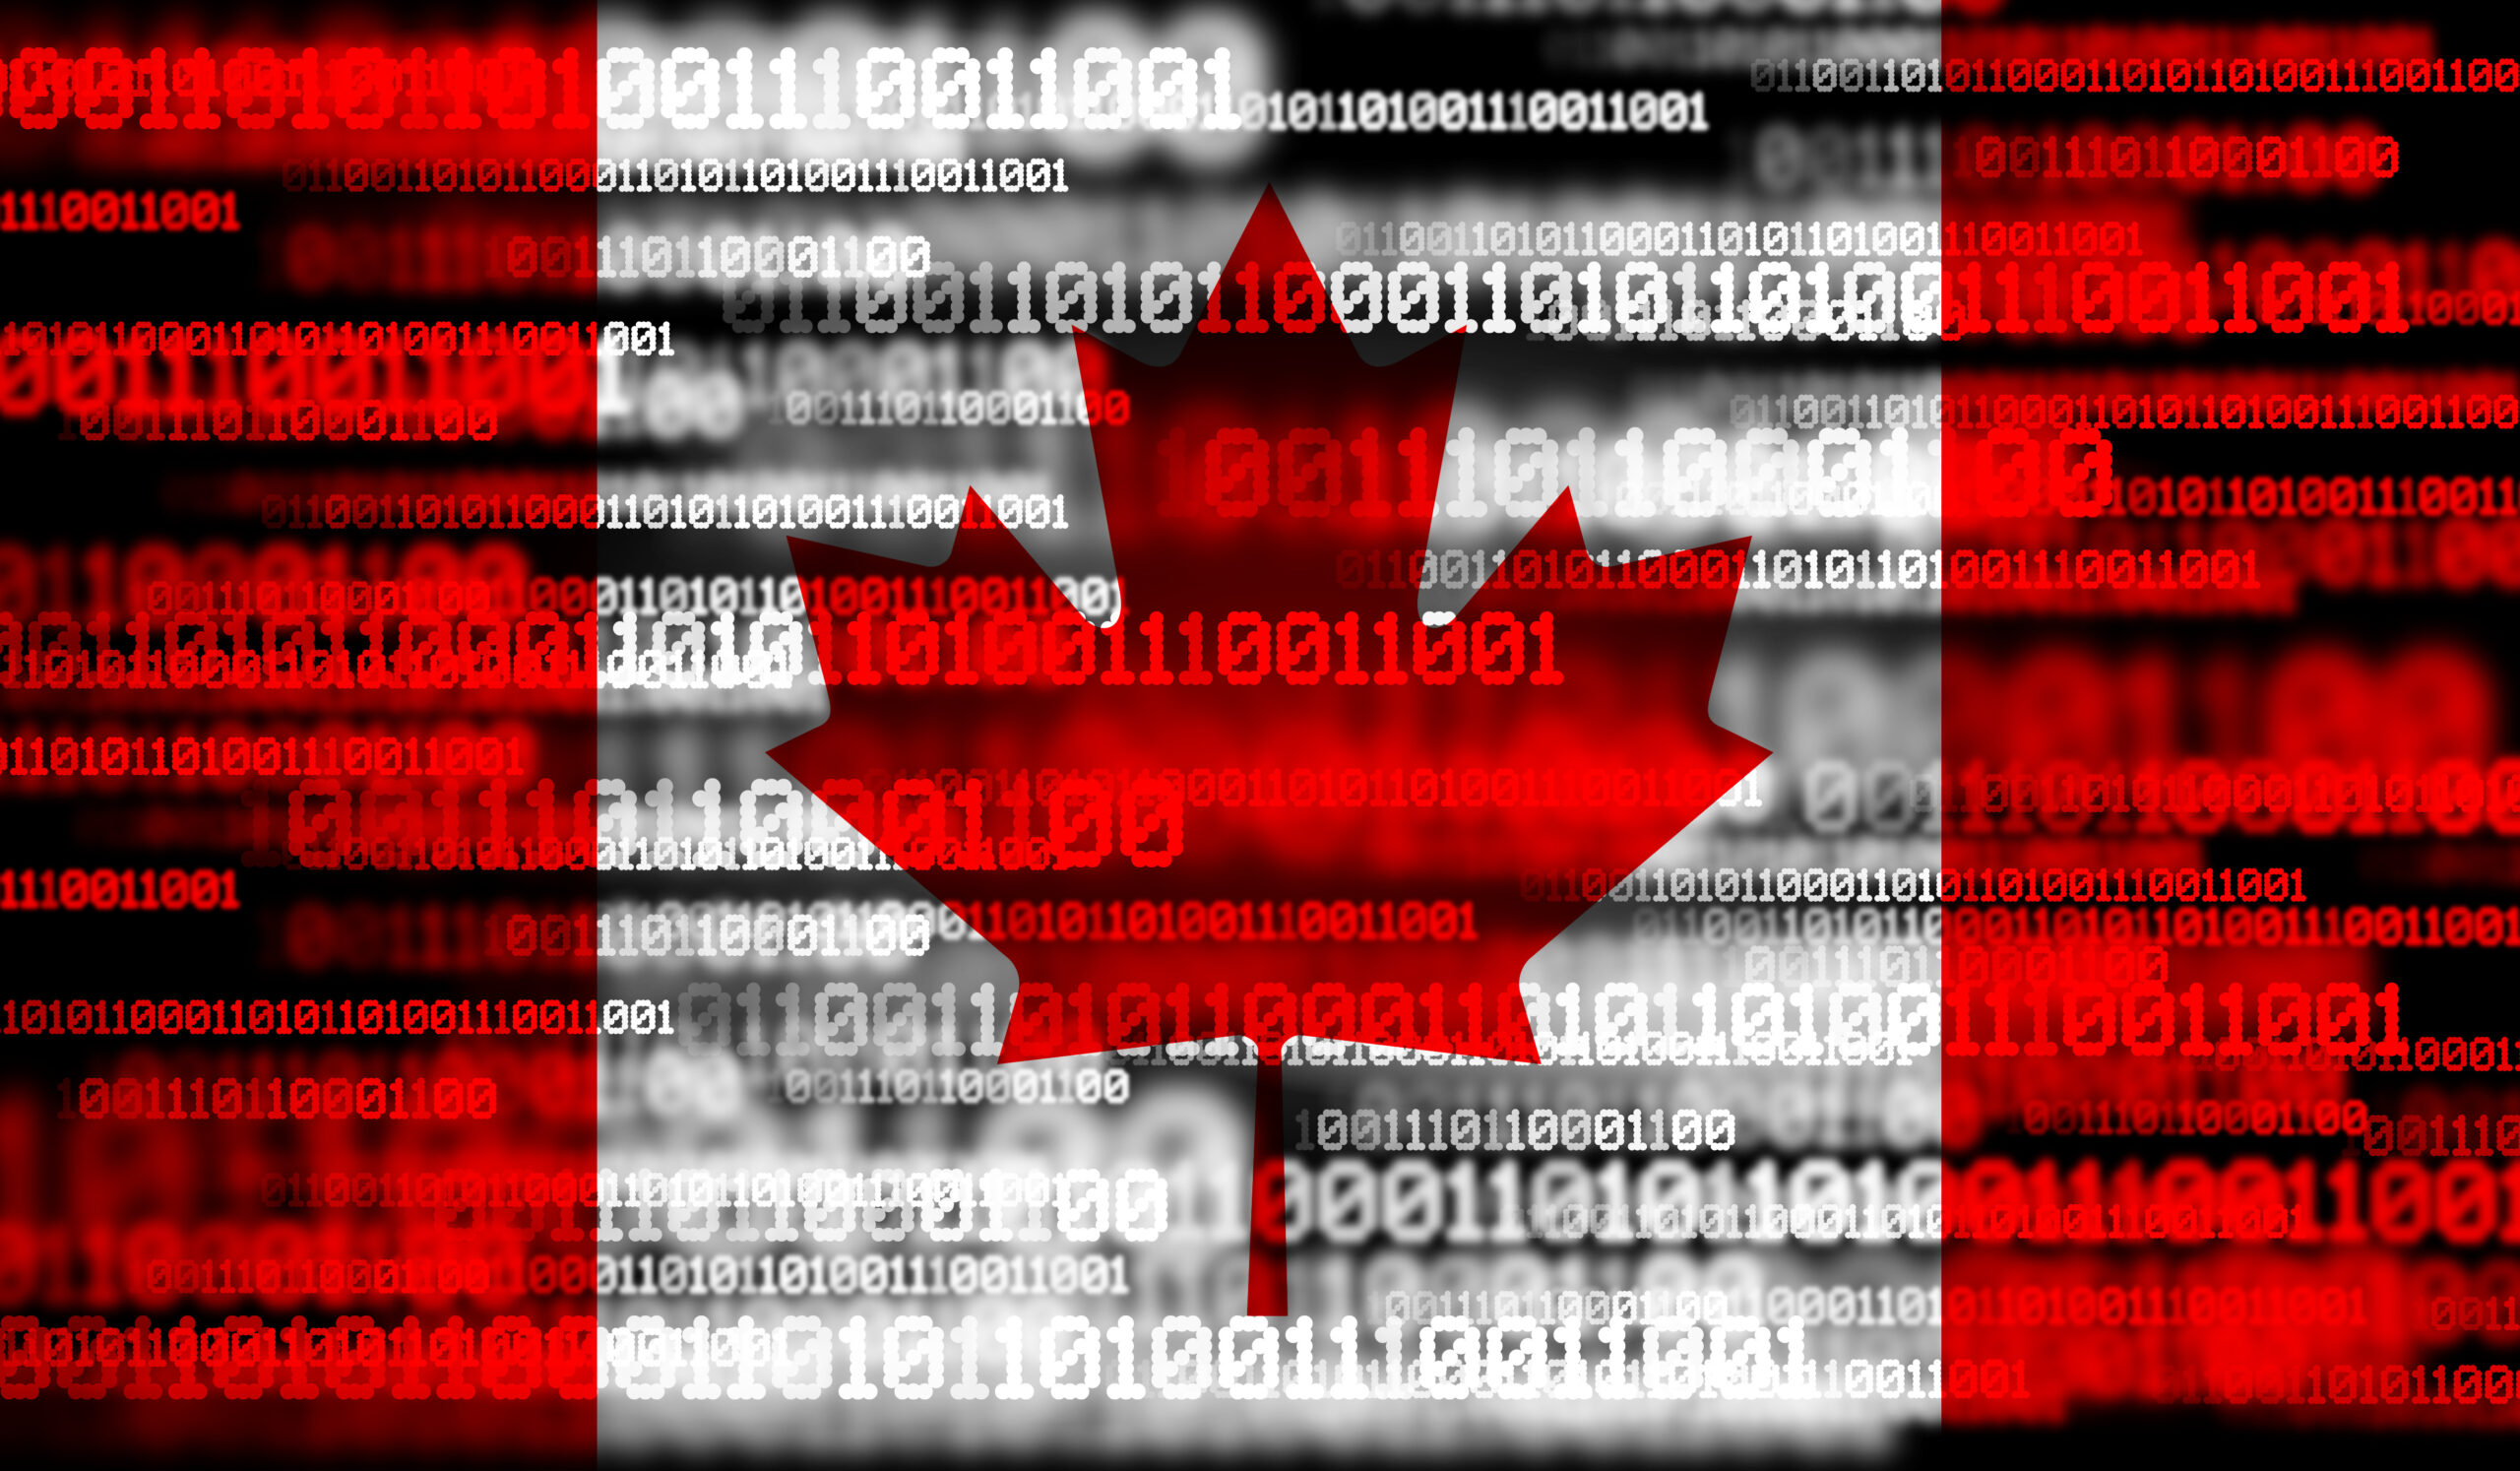 Canada: Indian DDoS attack against military and parliament websites